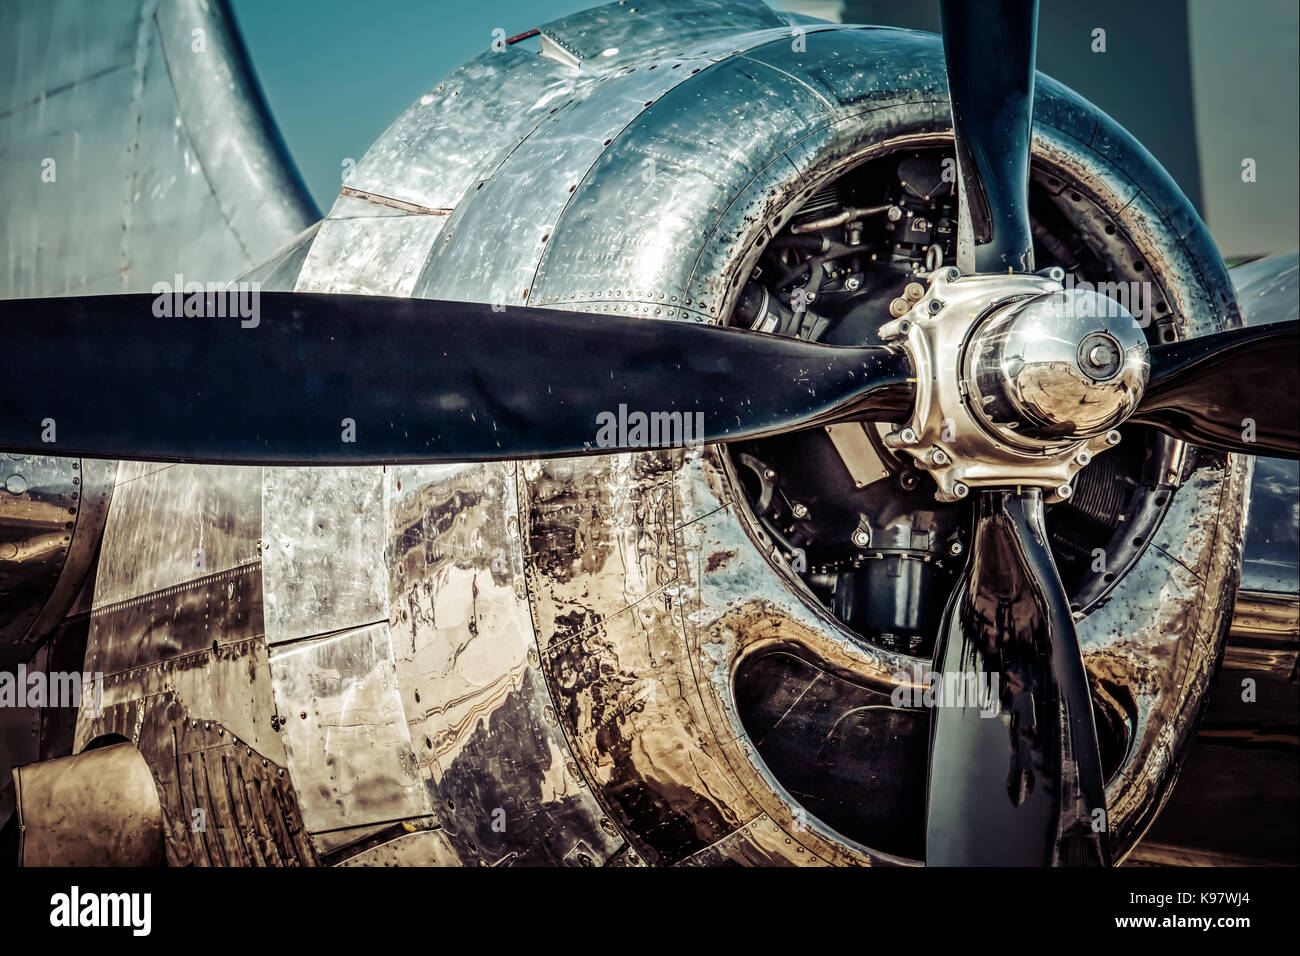 The front view of the propellor of a World War Two era bomber. Stock Photo